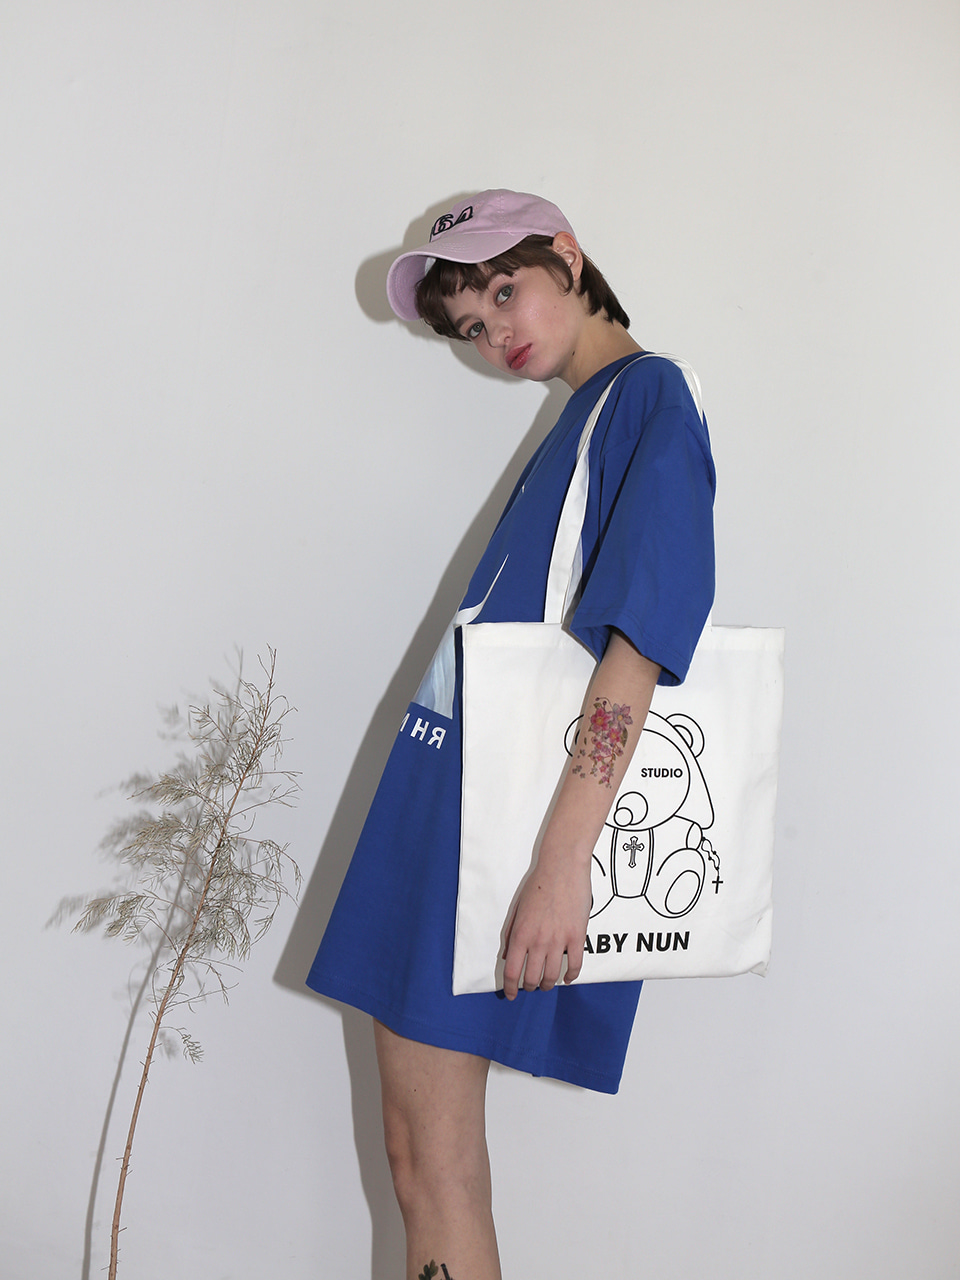 [sold out] 1 1 baby nun eco bag - WHITE